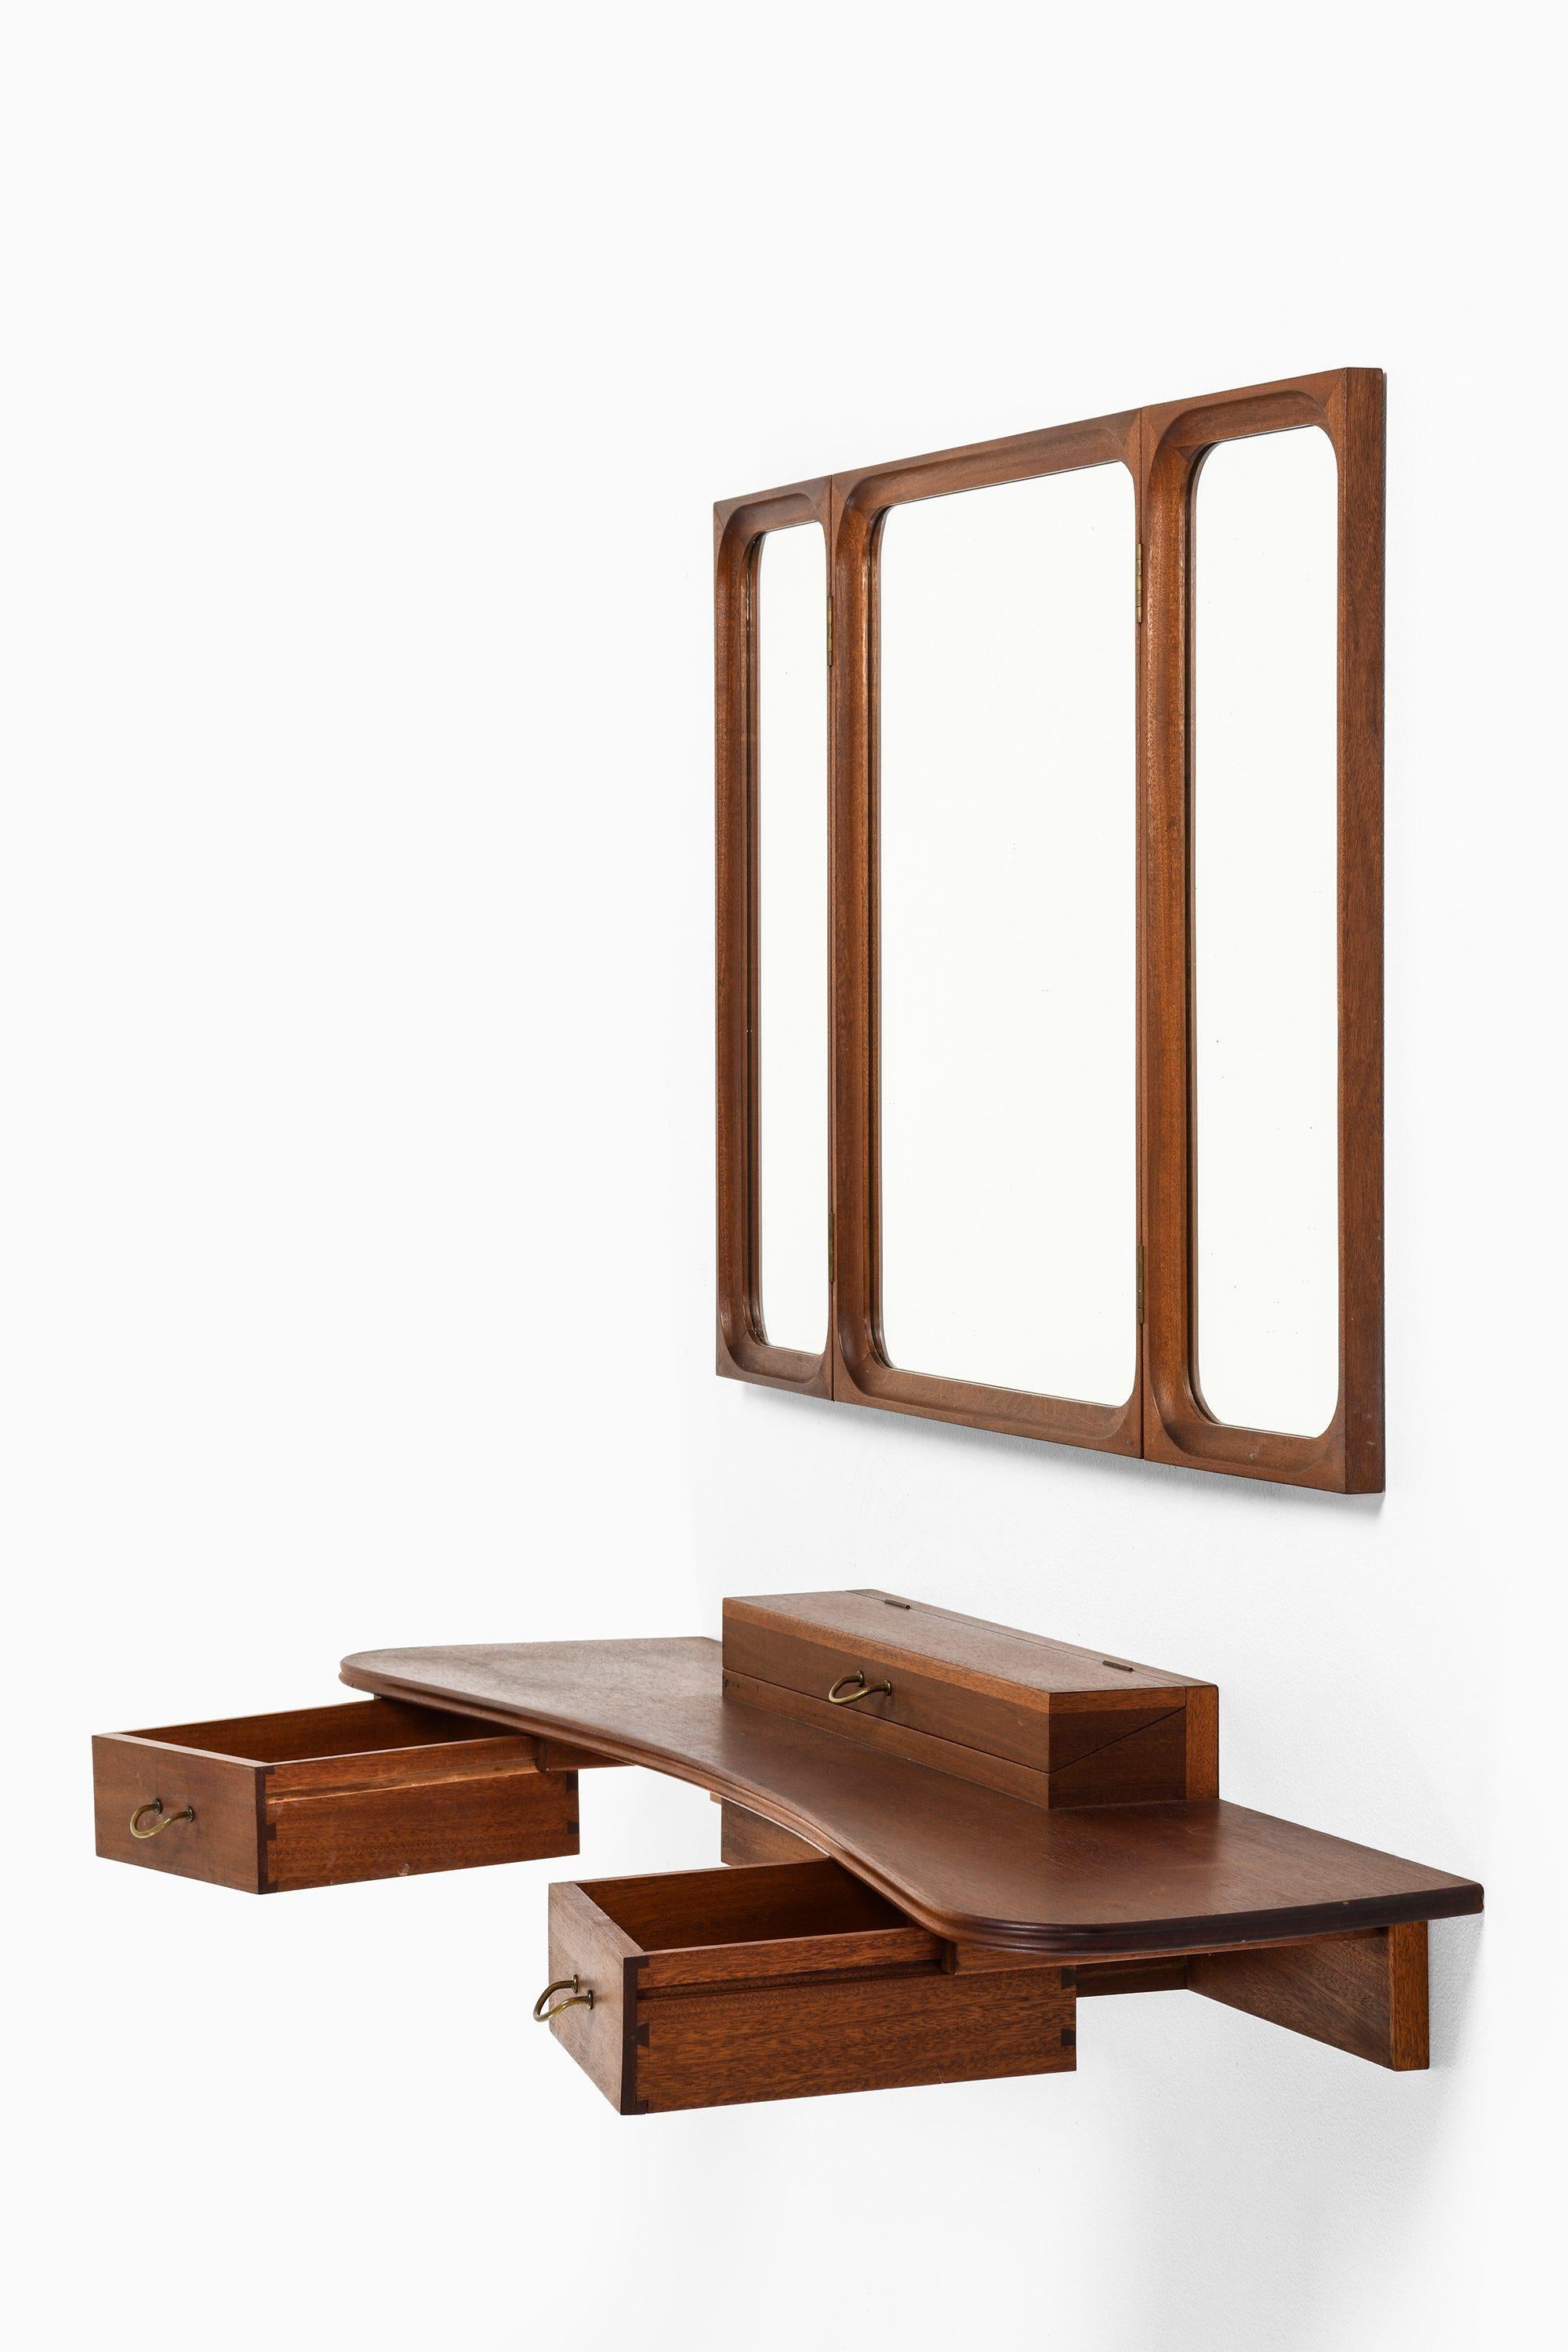 Set of Vanity with Mirror in Mahogany and Brass by Frode Holm, 1950s

Additional Information:
Material: Mahogany, brass
Style: midcentury, Scandinavian
Produced by Illums Bolighus in Denmark
Dimensions (W x D x H): 110 x 29 x 17 cm
Dimensions